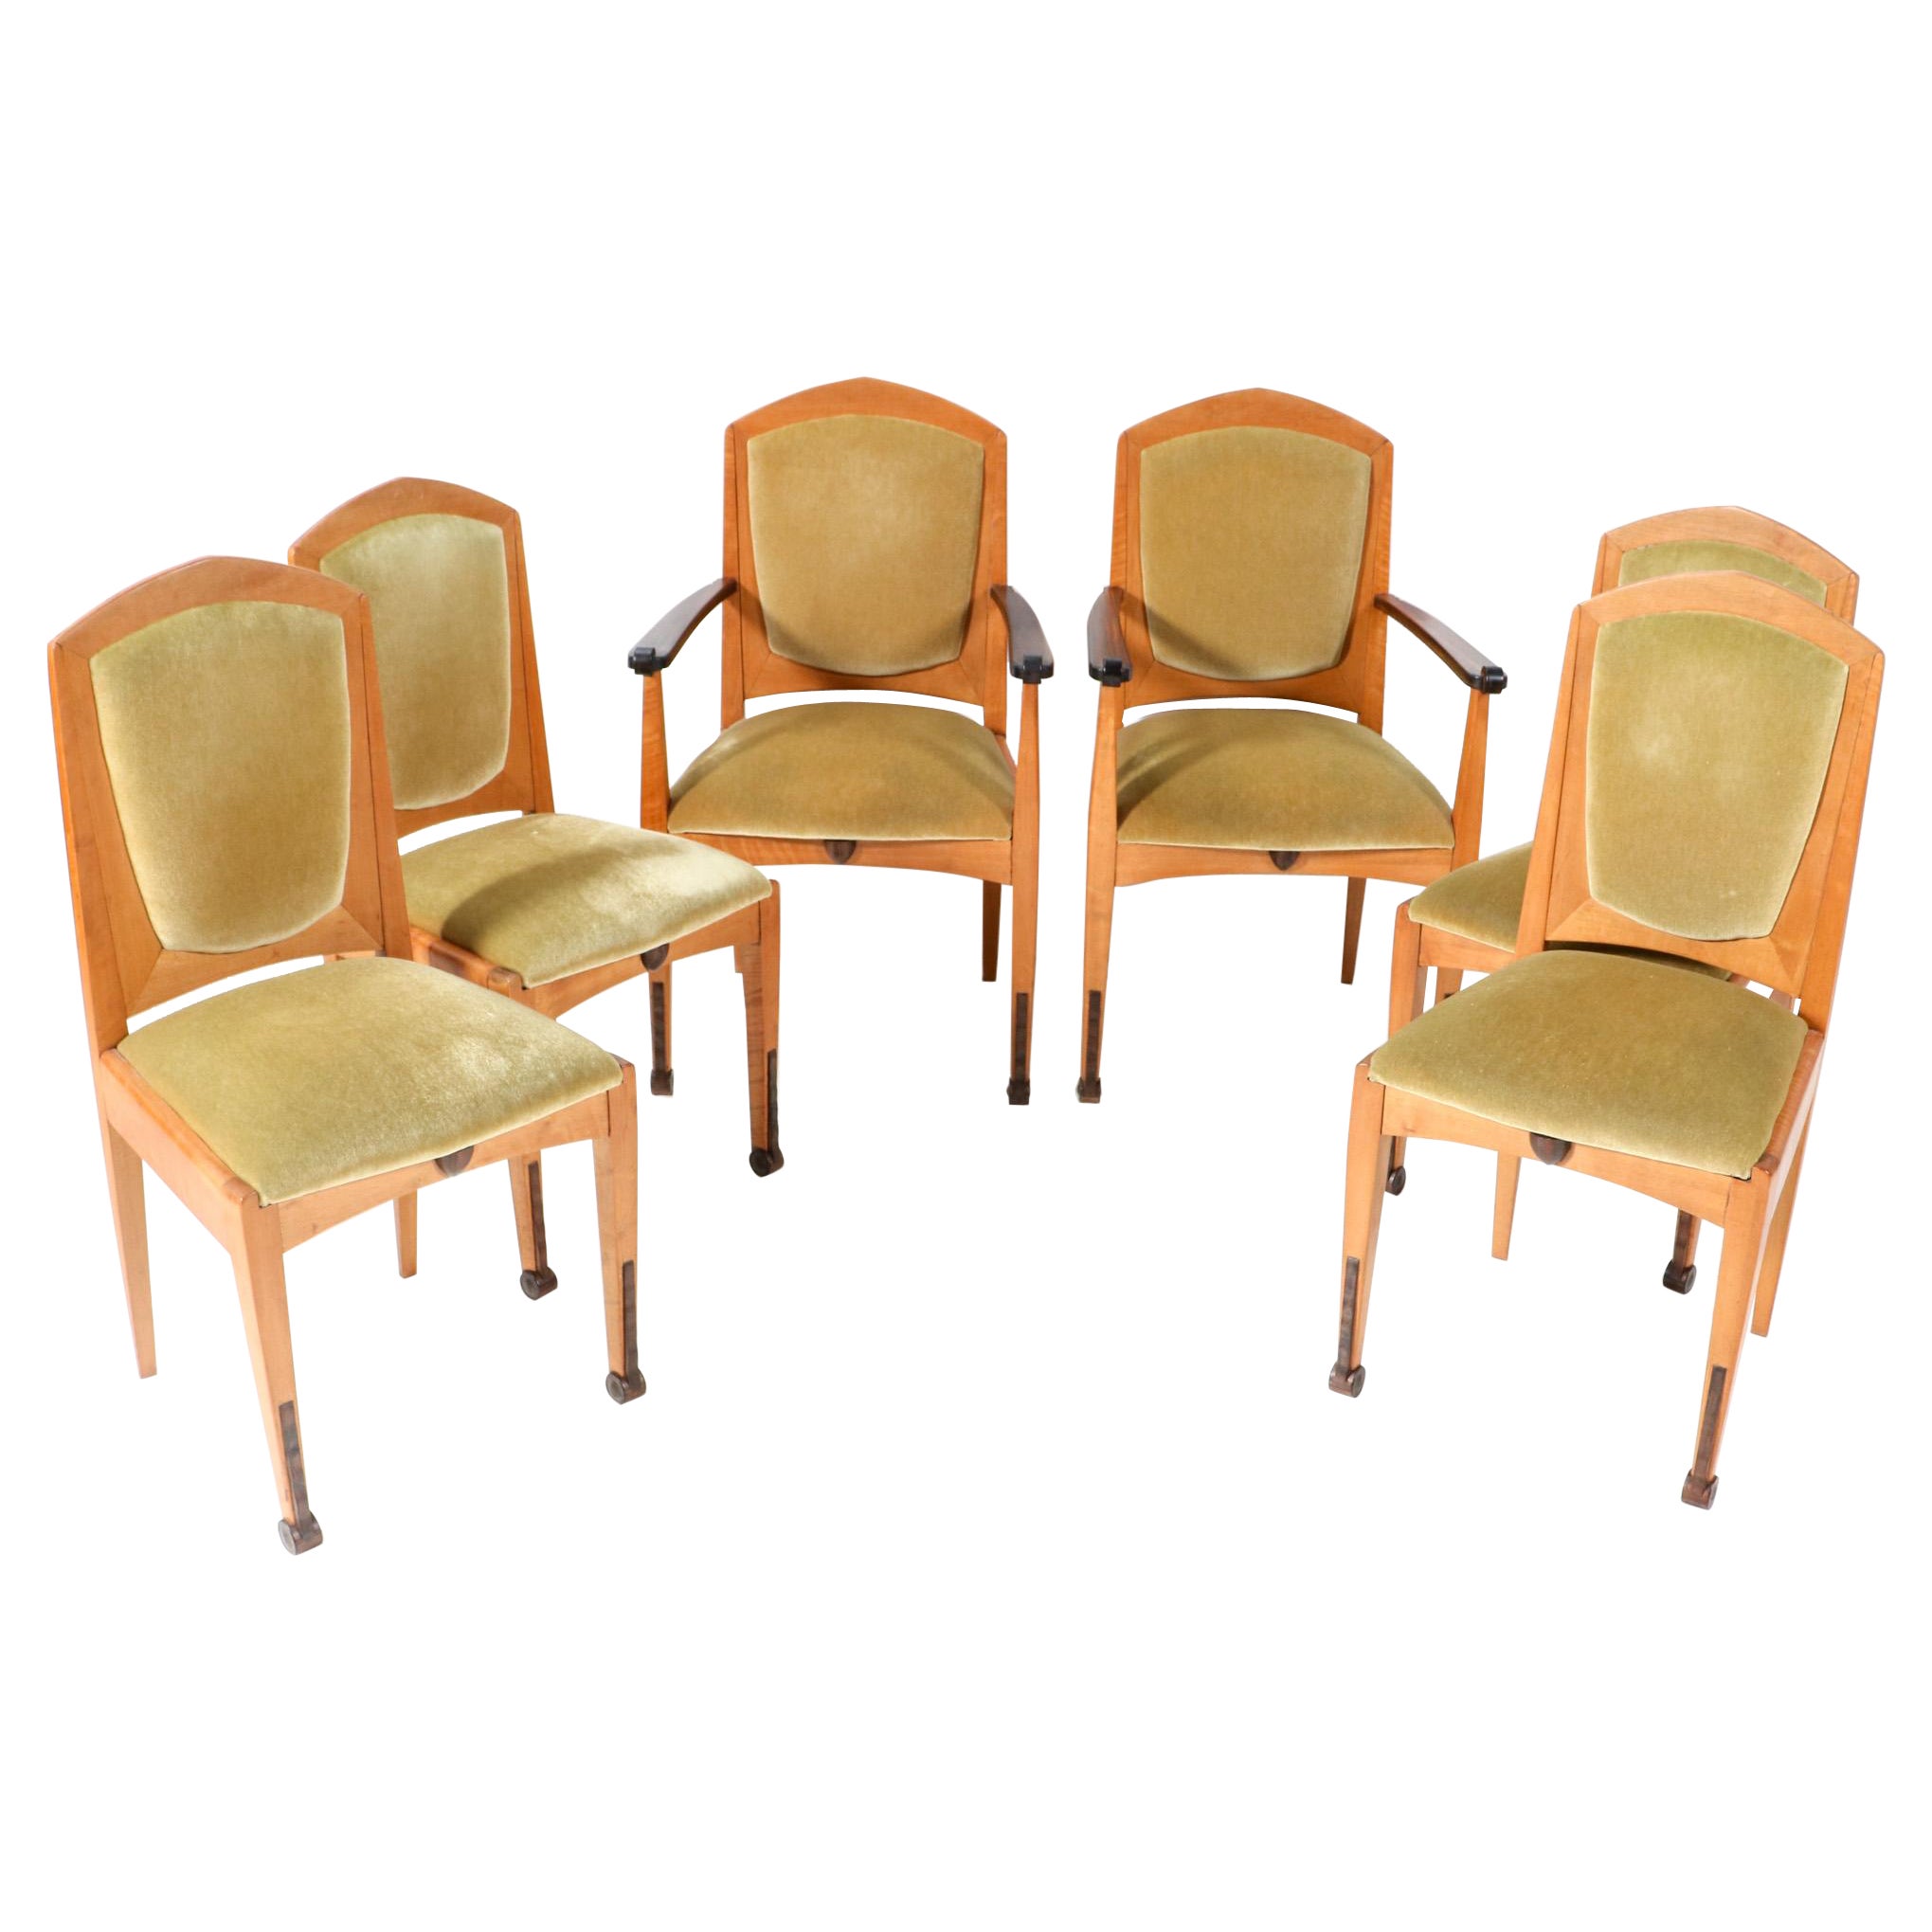 Set of Six Art Deco Amsterdamse School Dining Room Chairs by J.J. Zijfers, 1920s For Sale